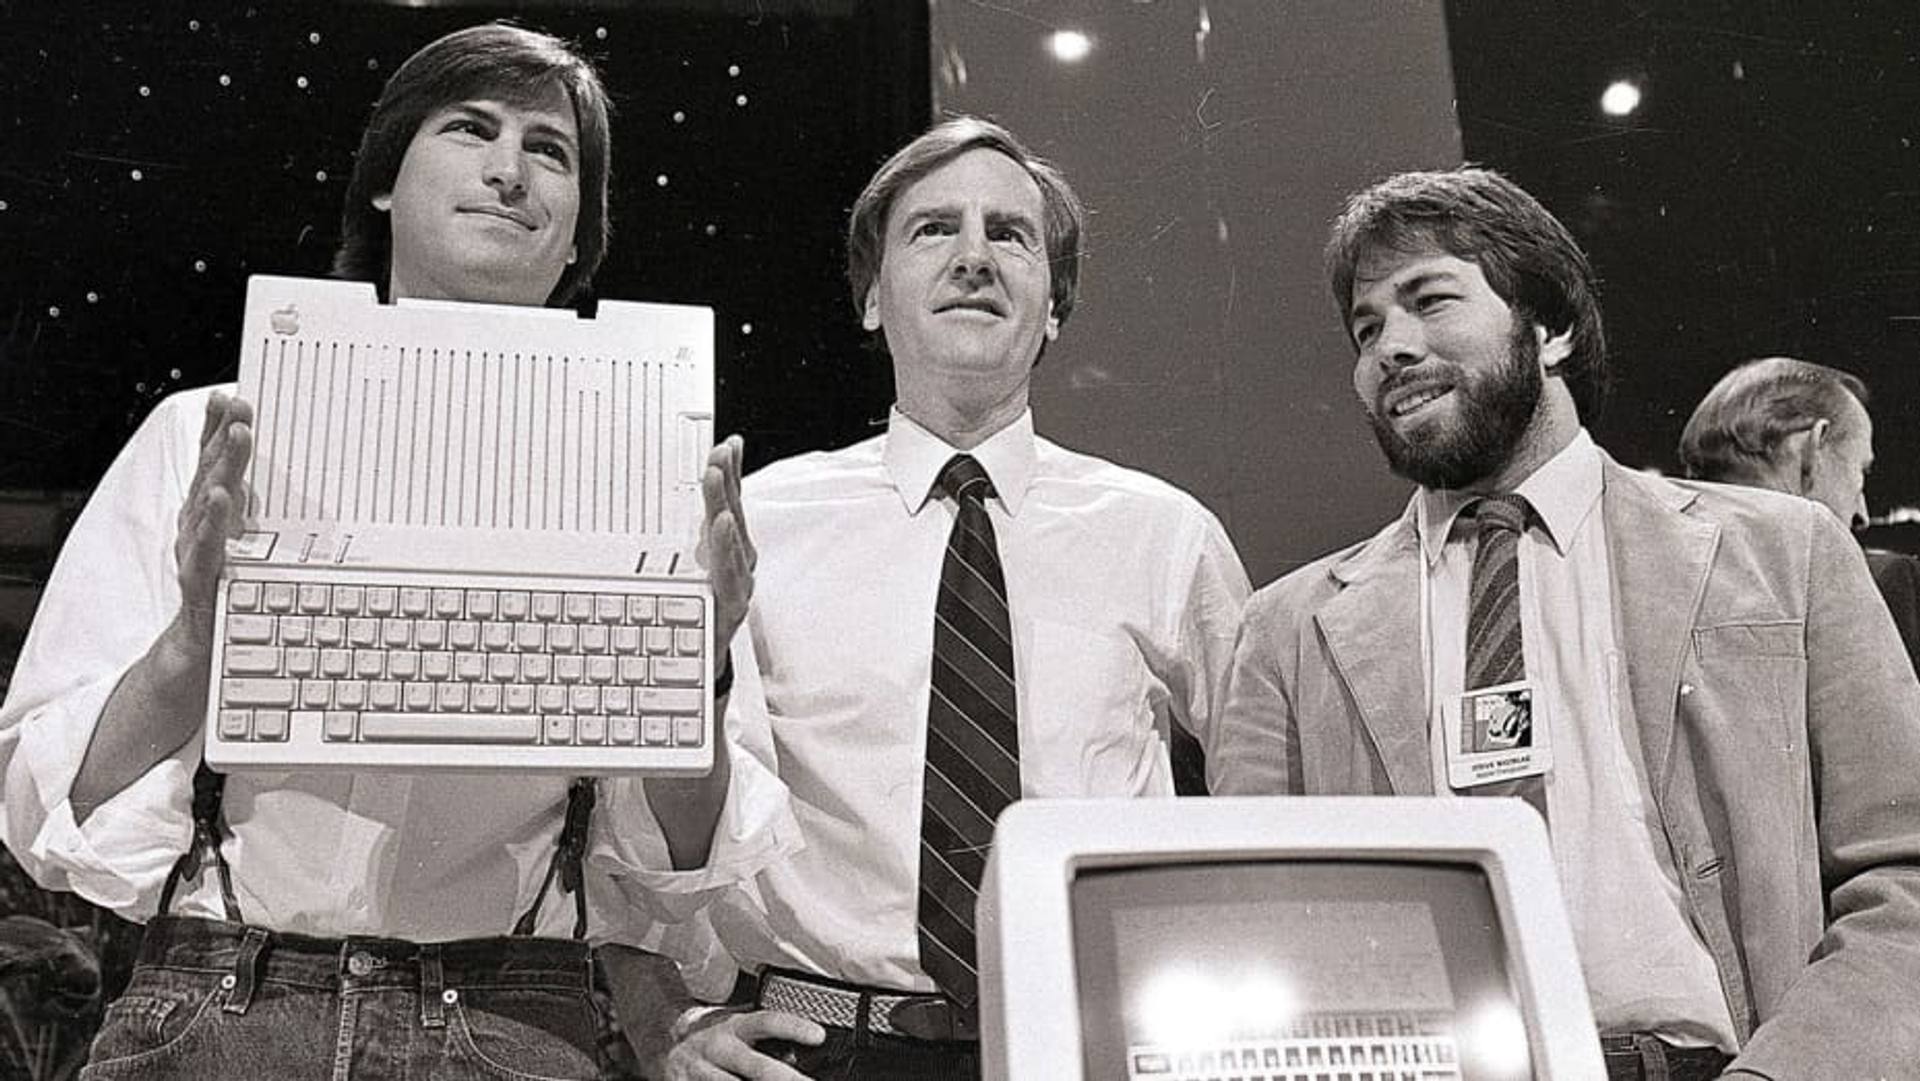 Steve Jobs, John Sculley, and Steve Wozniak (from left to right) | Source: CNBC